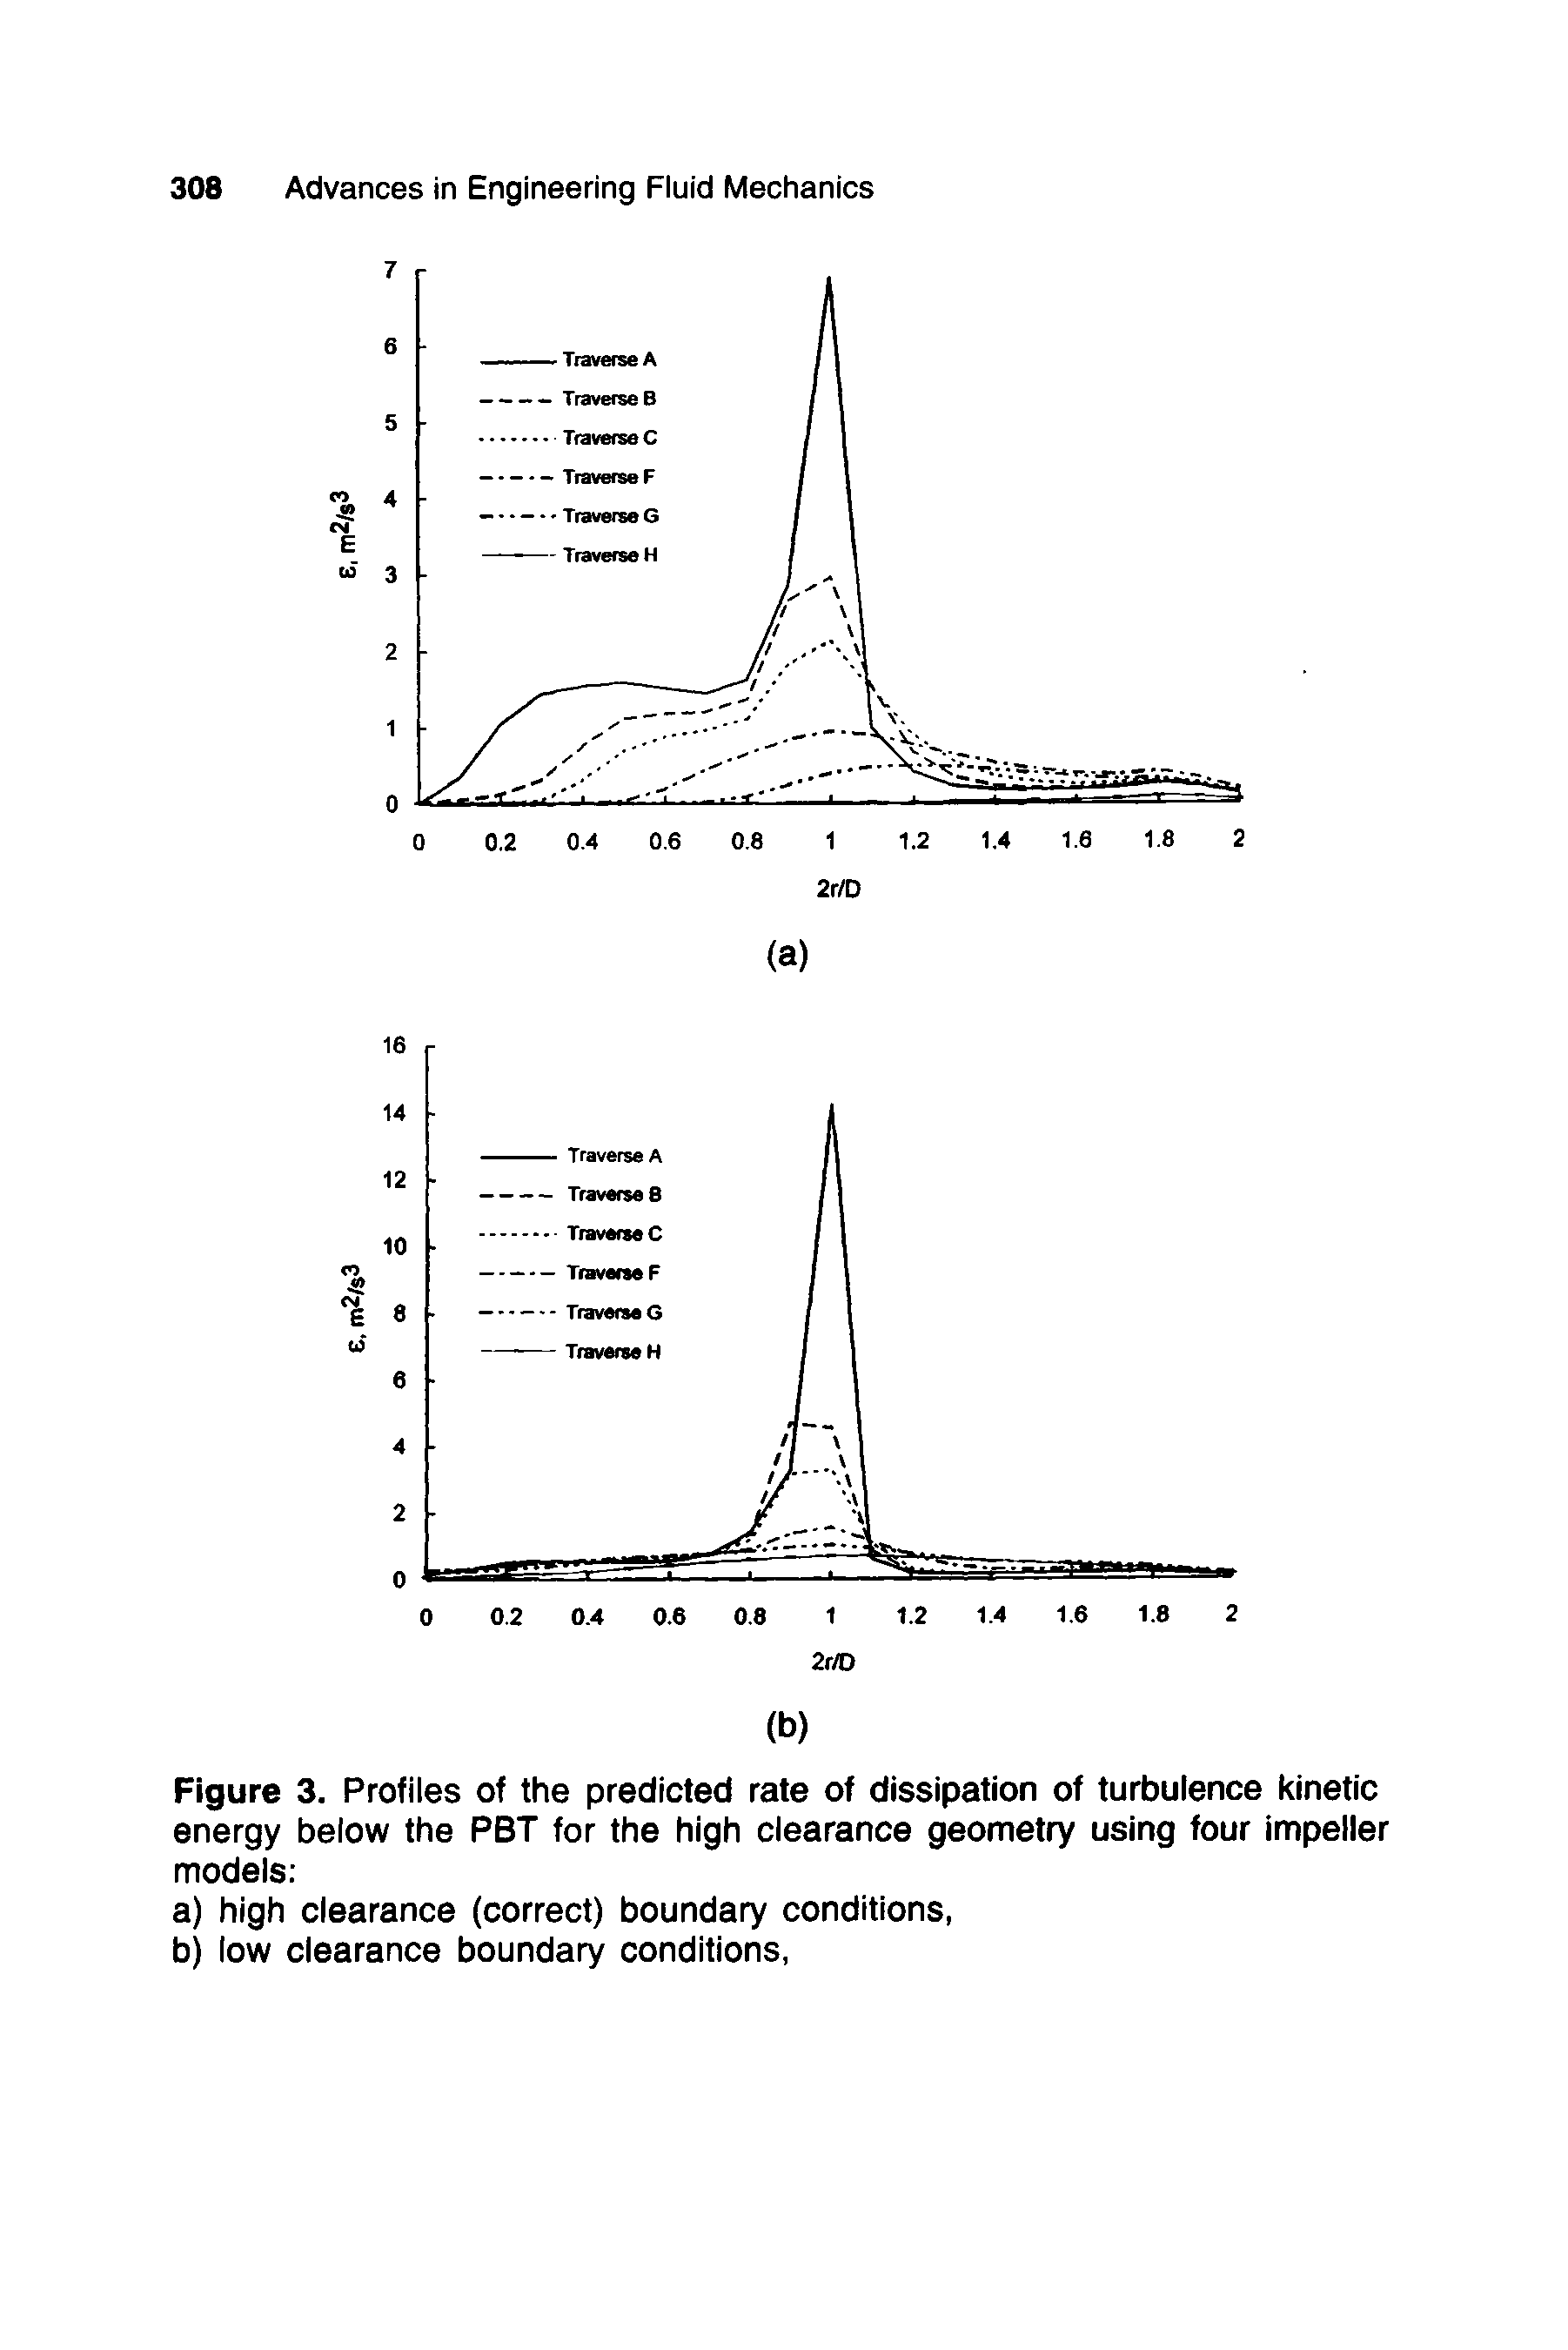 Figure 3. Profiles of the predicted rate of dissipation of turbulence kinetic energy below the PBT for the high clearance geometry using four impeller models ...